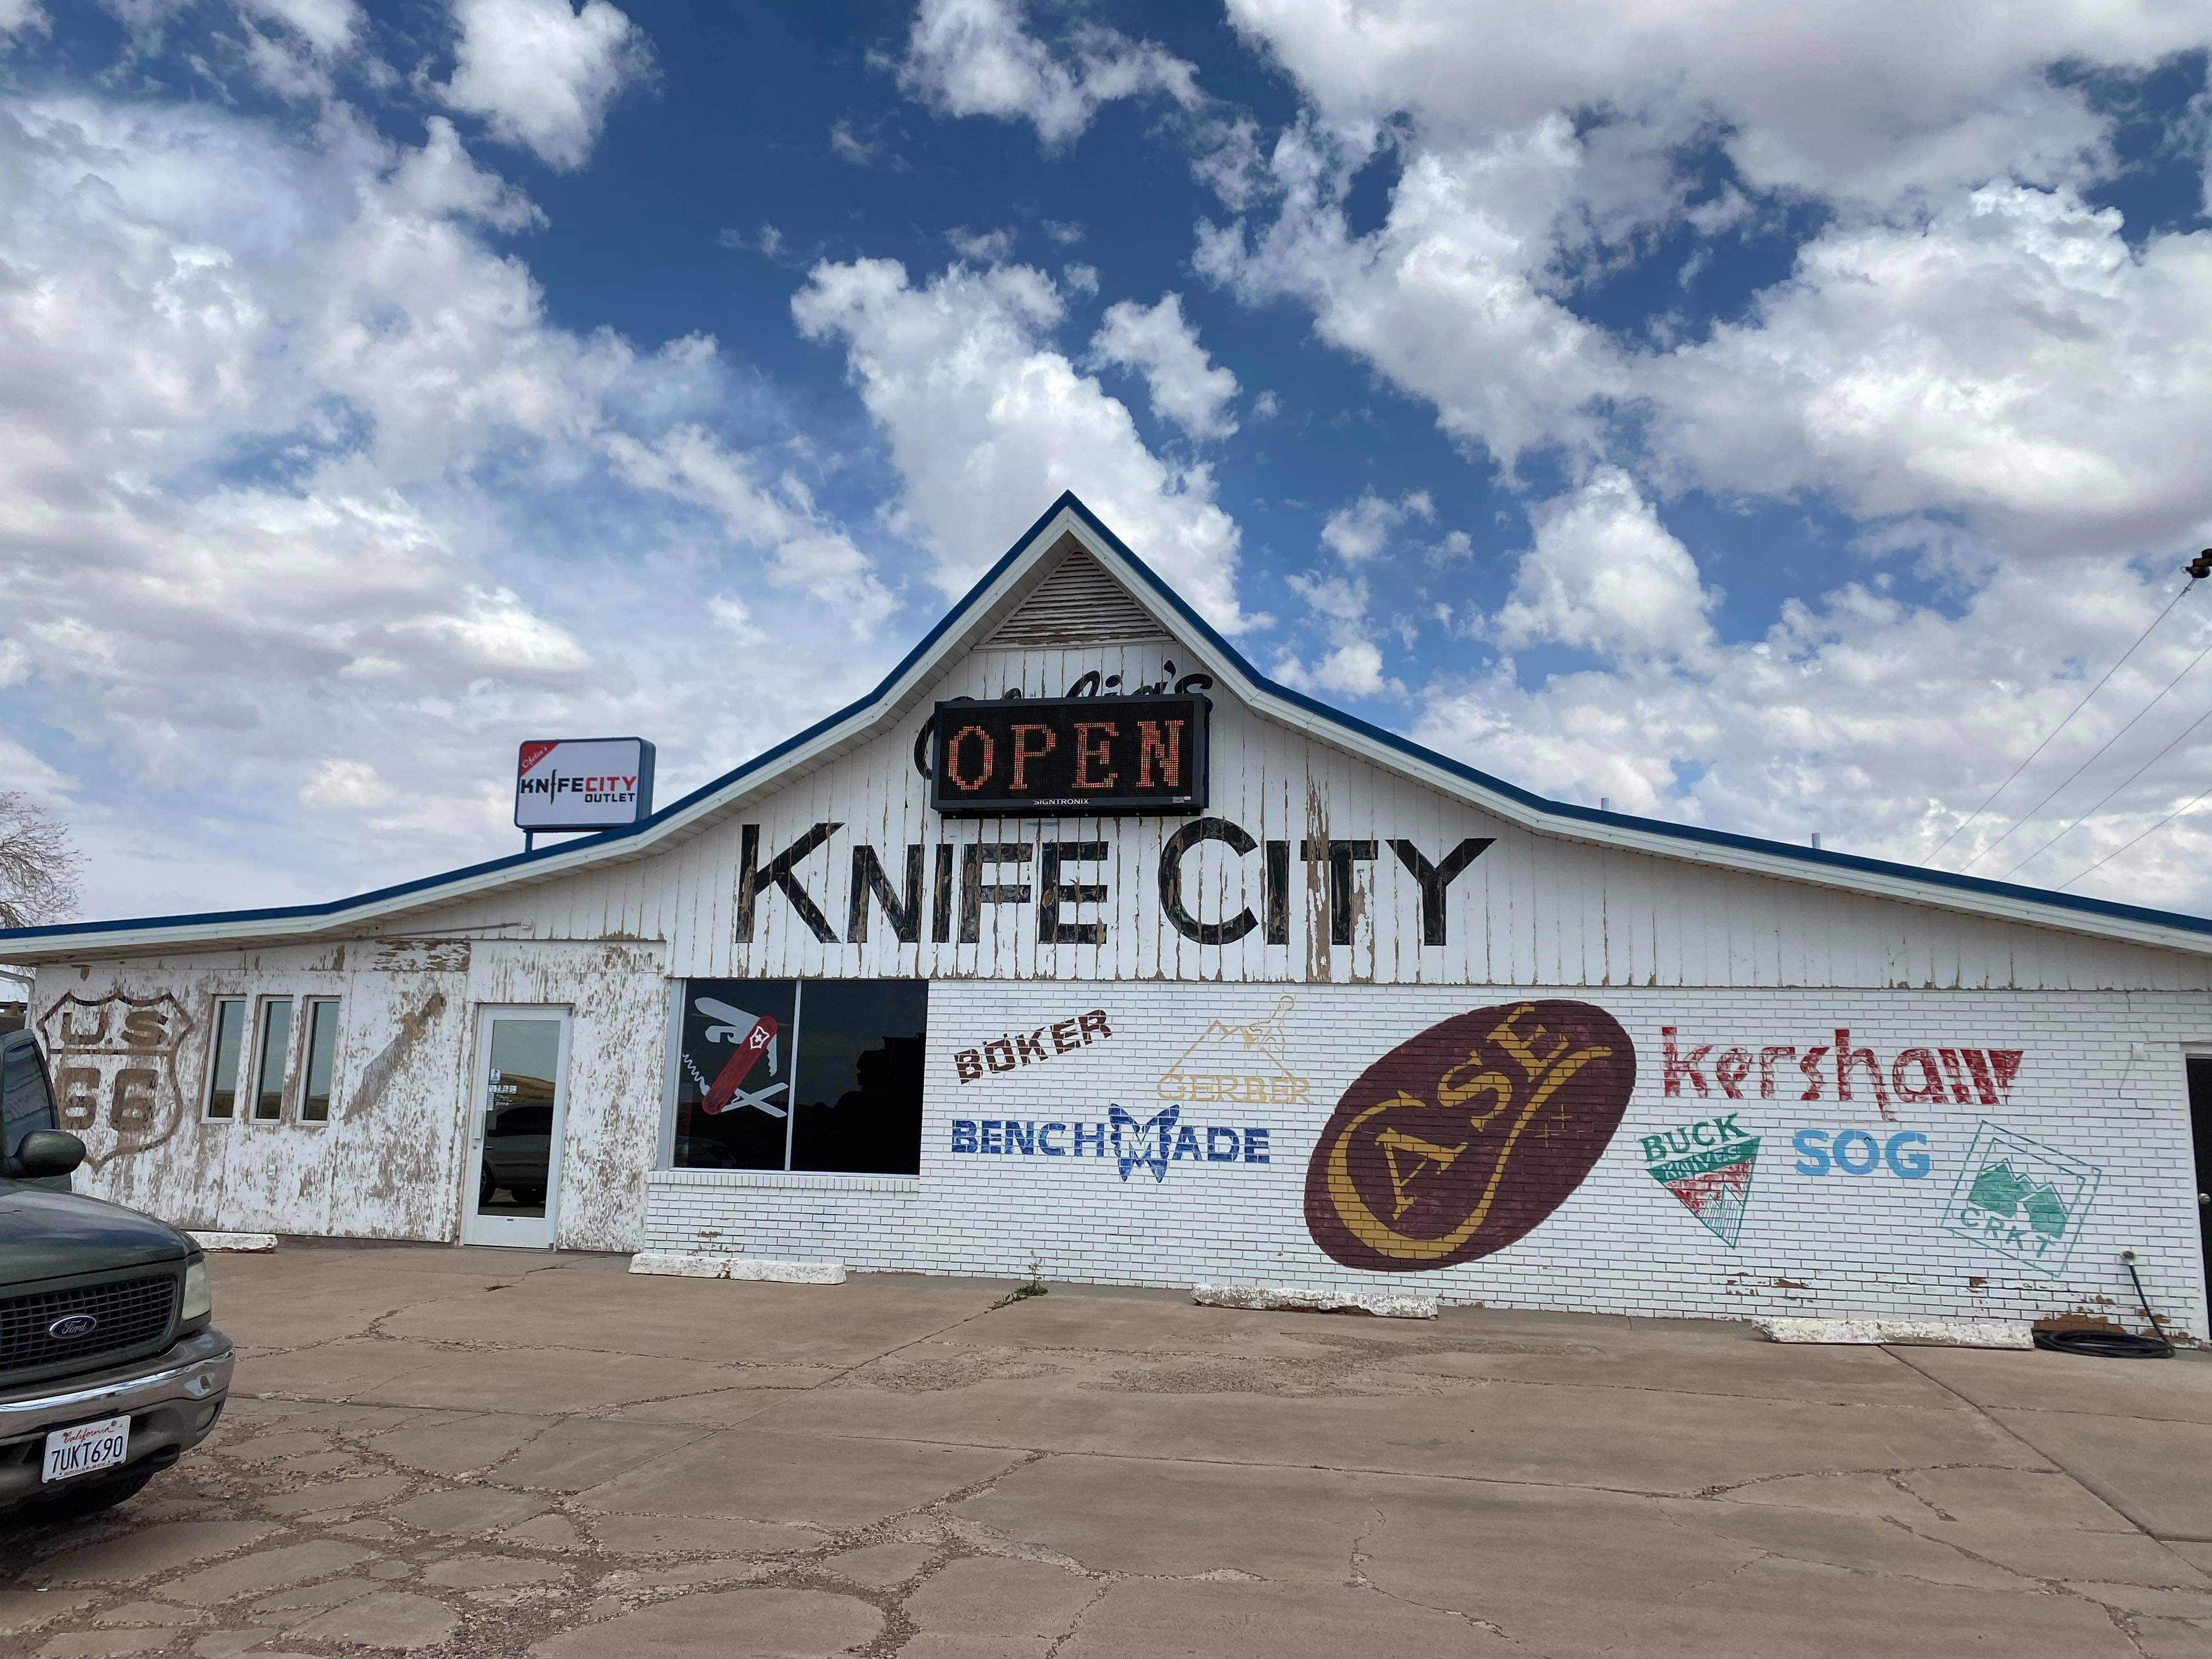 Crazy place, ridiculous vibes, lots of knives